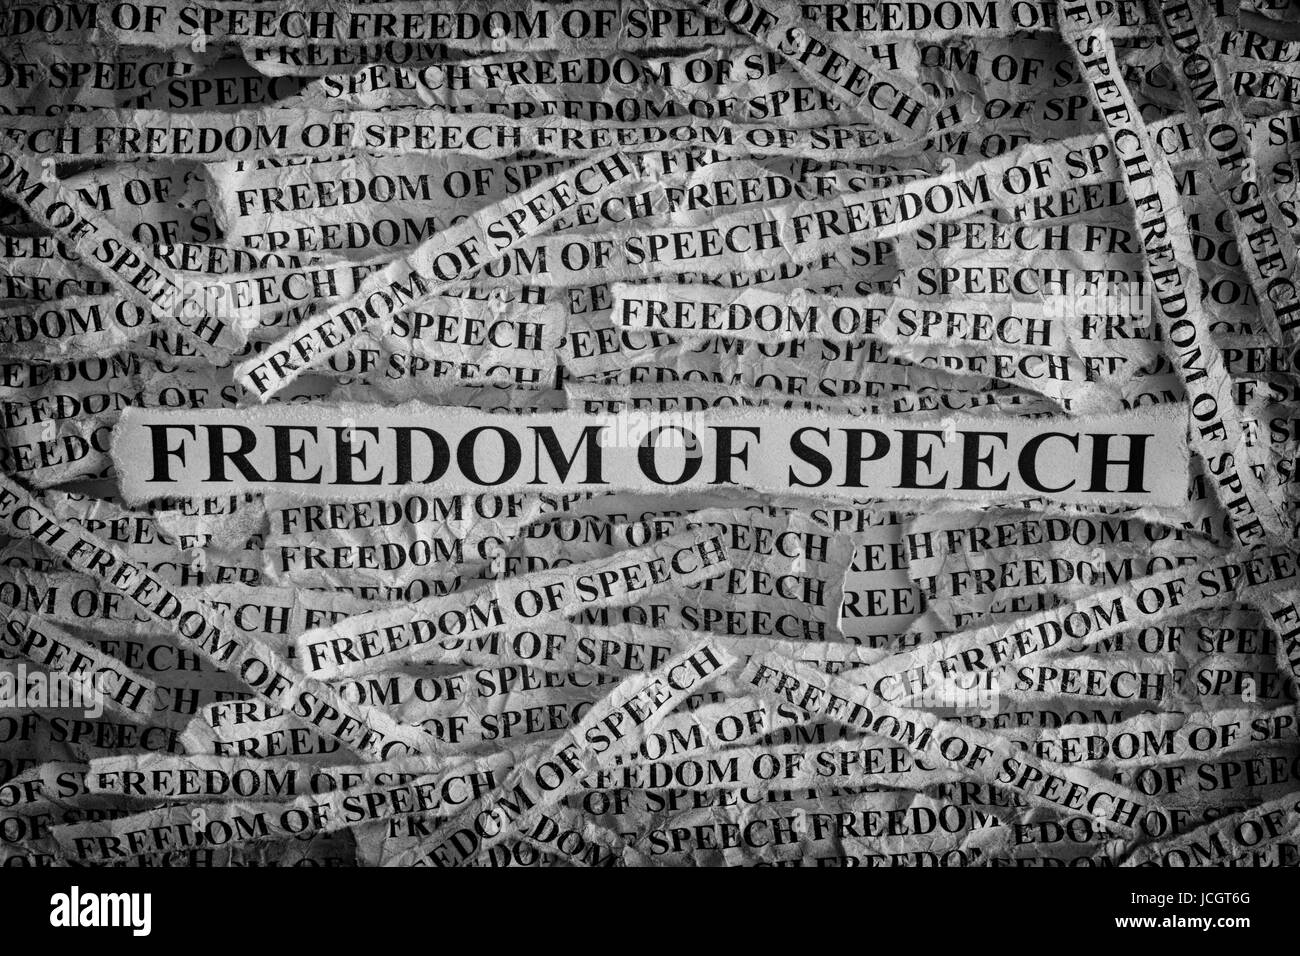 Freedom of speech. Torn pieces of paper with the words Freedom of speech. Concept Image. Black and White. Closeup. Stock Photo